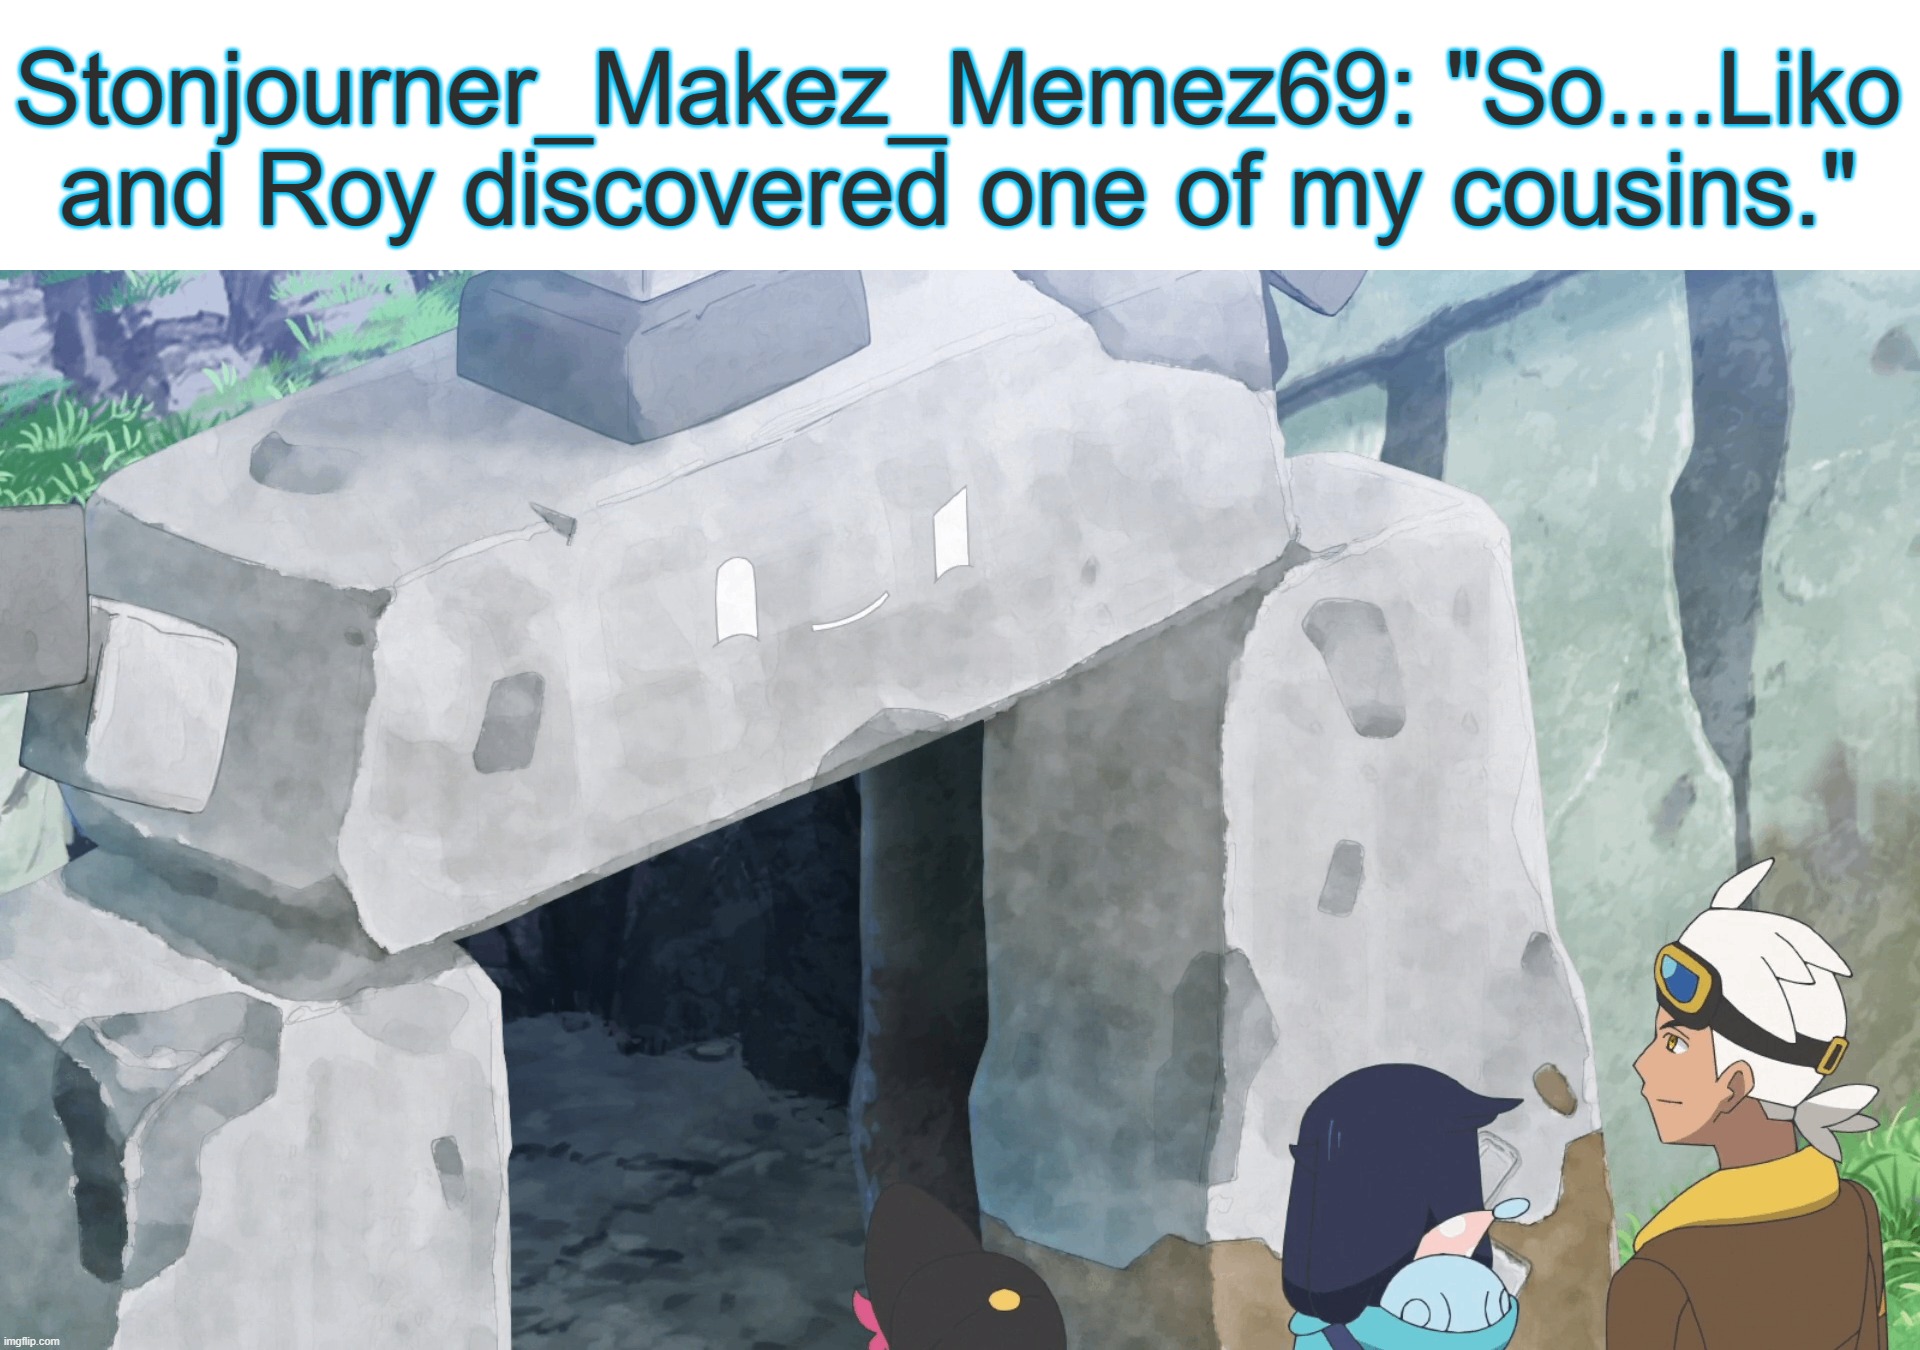 Stonjourner_Makez_Memez69: "He was part of the Old Castle as the guard of the entrance." | Stonjourner_Makez_Memez69: "So....Liko and Roy discovered one of my cousins." | image tagged in stonjourner,cousin,pokemon horizons | made w/ Imgflip meme maker